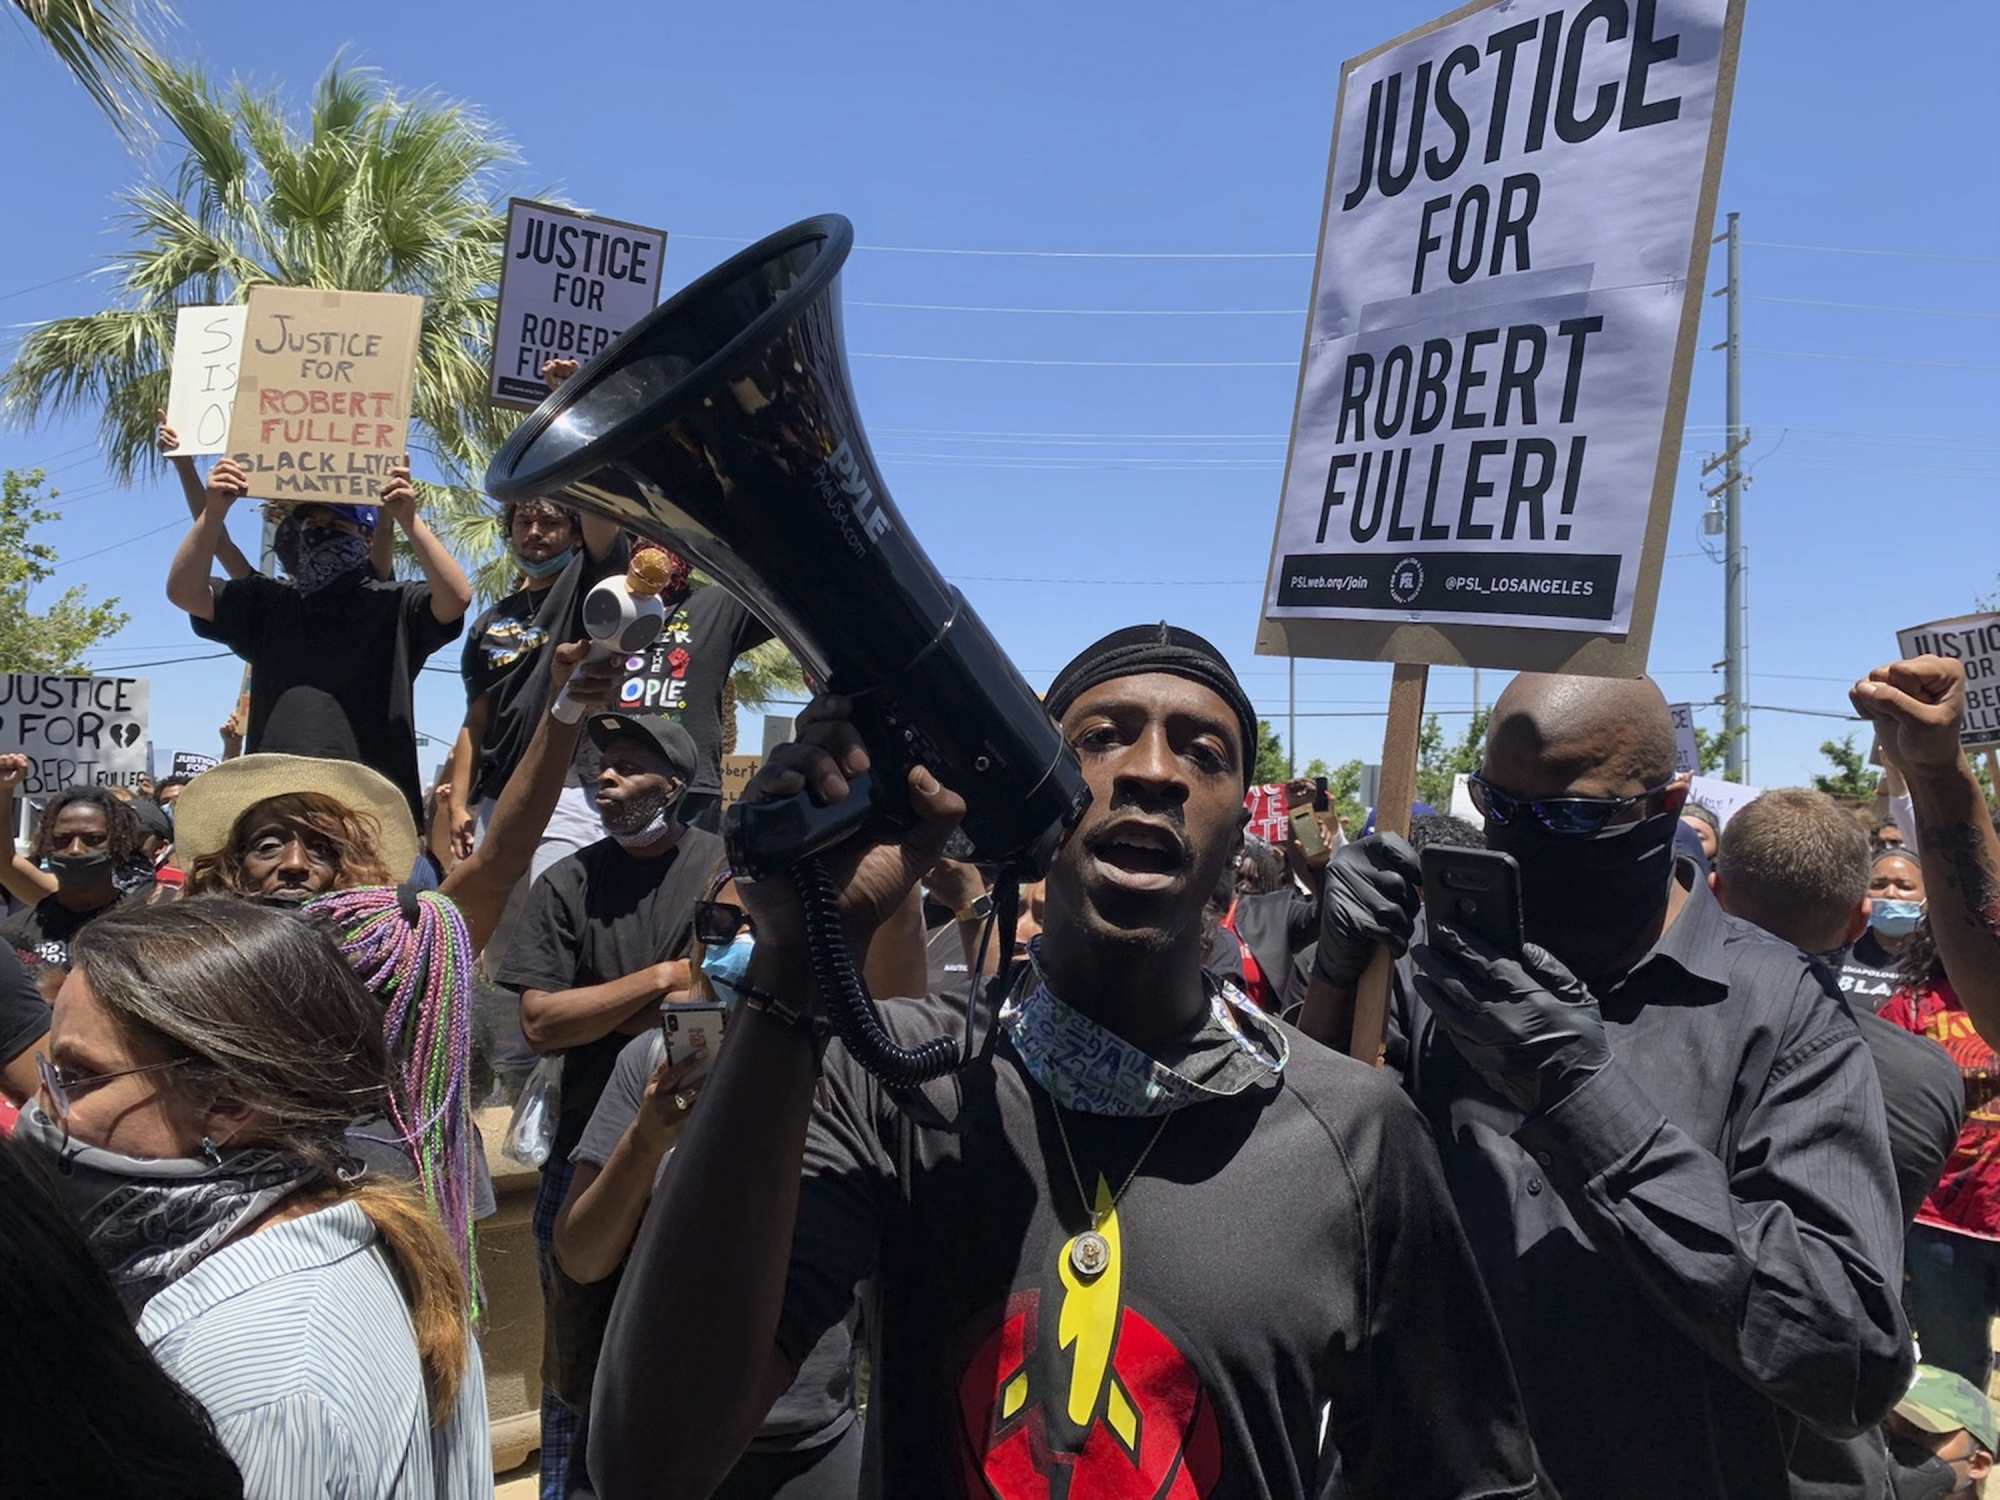 Demonstrators gather Saturday, June 13, 2020, in front of City Hall in Palmdale, Calif. People marched to demand an investigation into the death of 24-year-old Robert Fuller, who was found hanging from a tree early Wednesday near City Hall. (Josie Huang/KPCC/LAist via AP)
ArcInfo